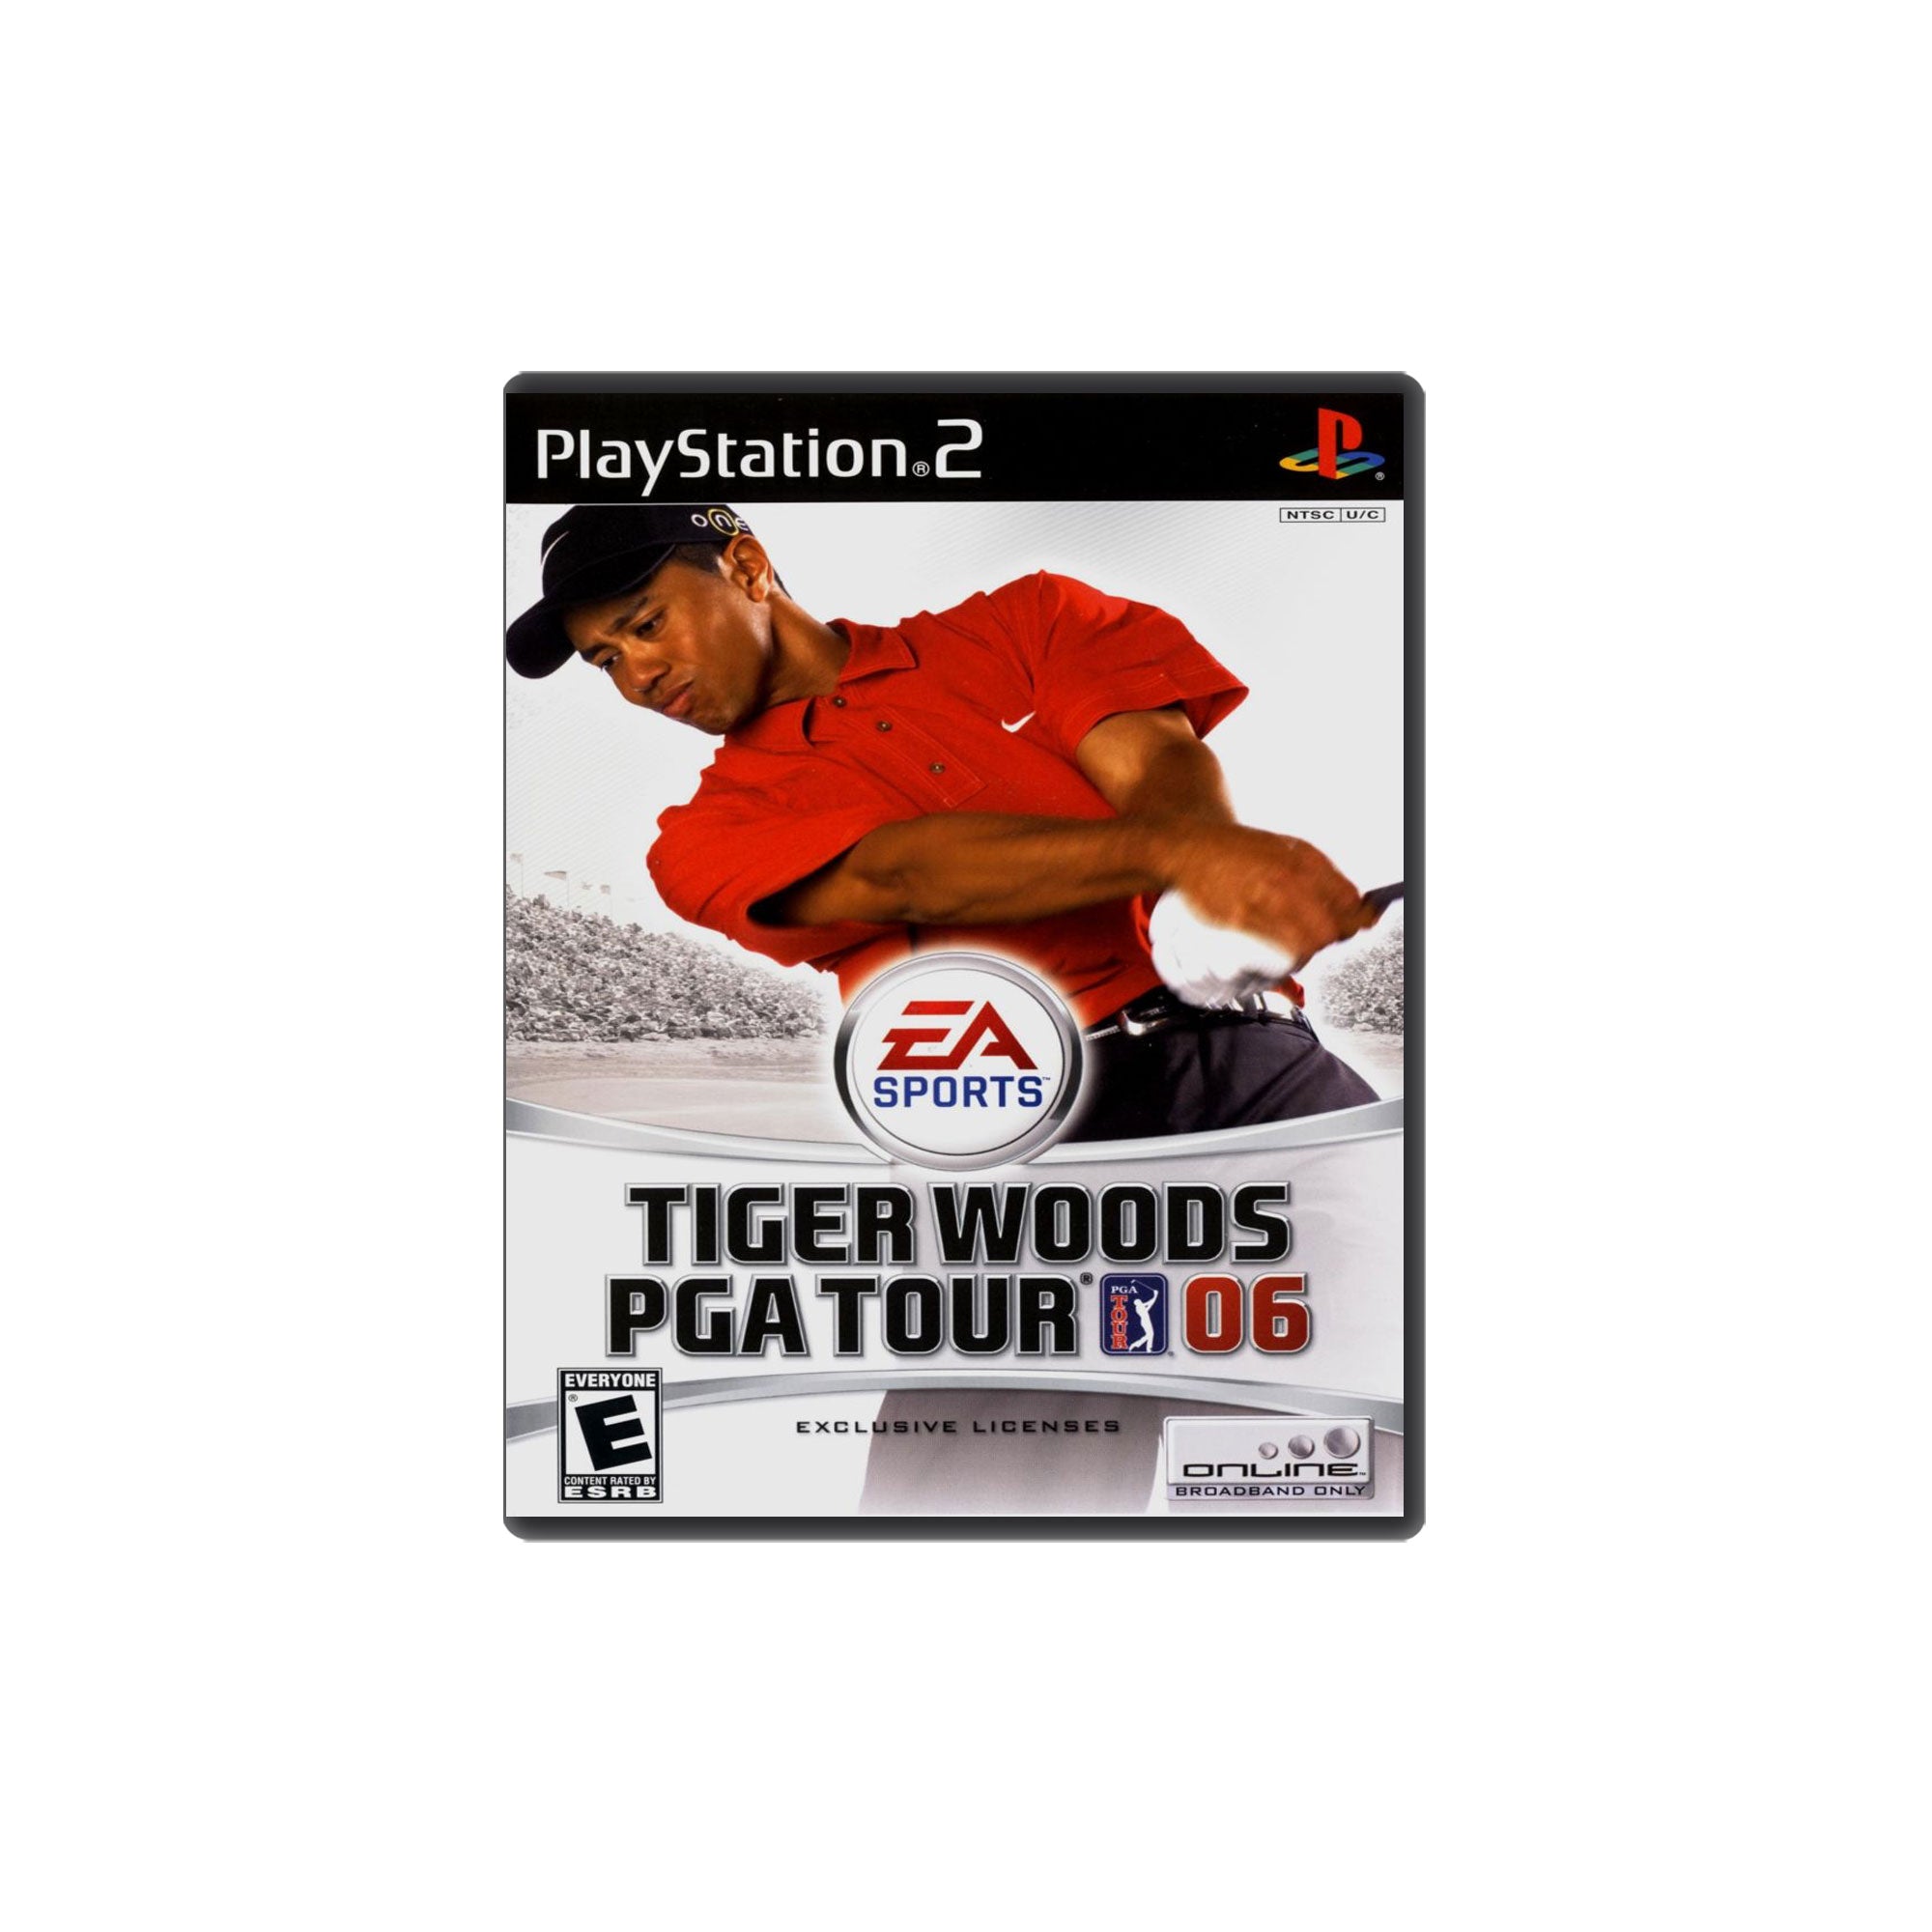 Swifty Games - Tiger Woods PGA Tour 06 (Playstation 2, 2005)